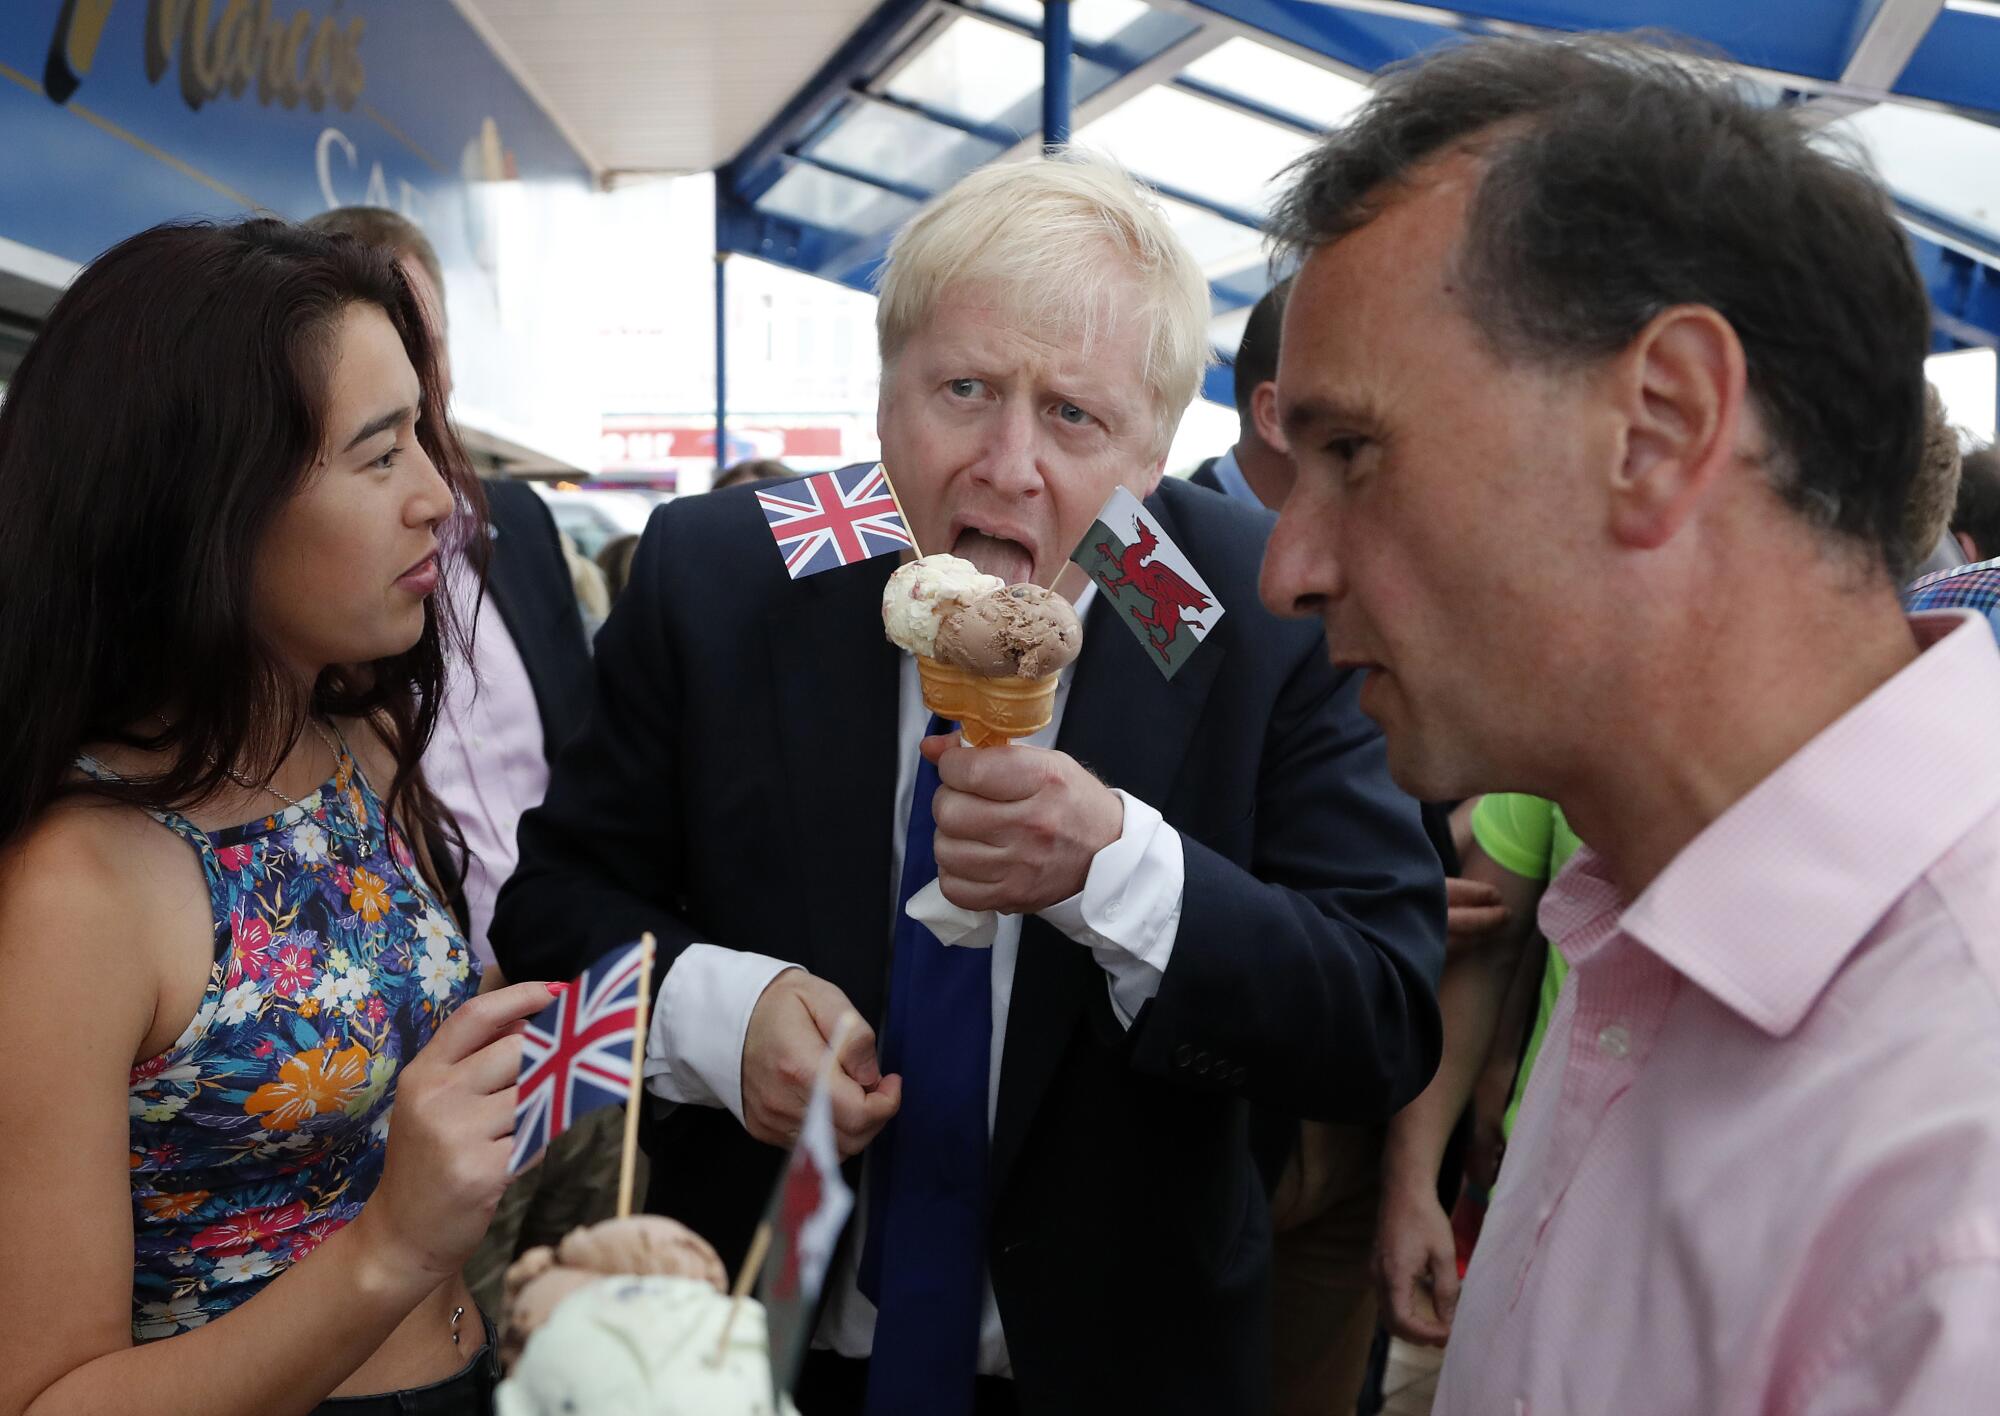 Conservative Party leadership candidate Boris Johnson, center, eats an ice cream cone in Barry Island, Wales, in 2019.